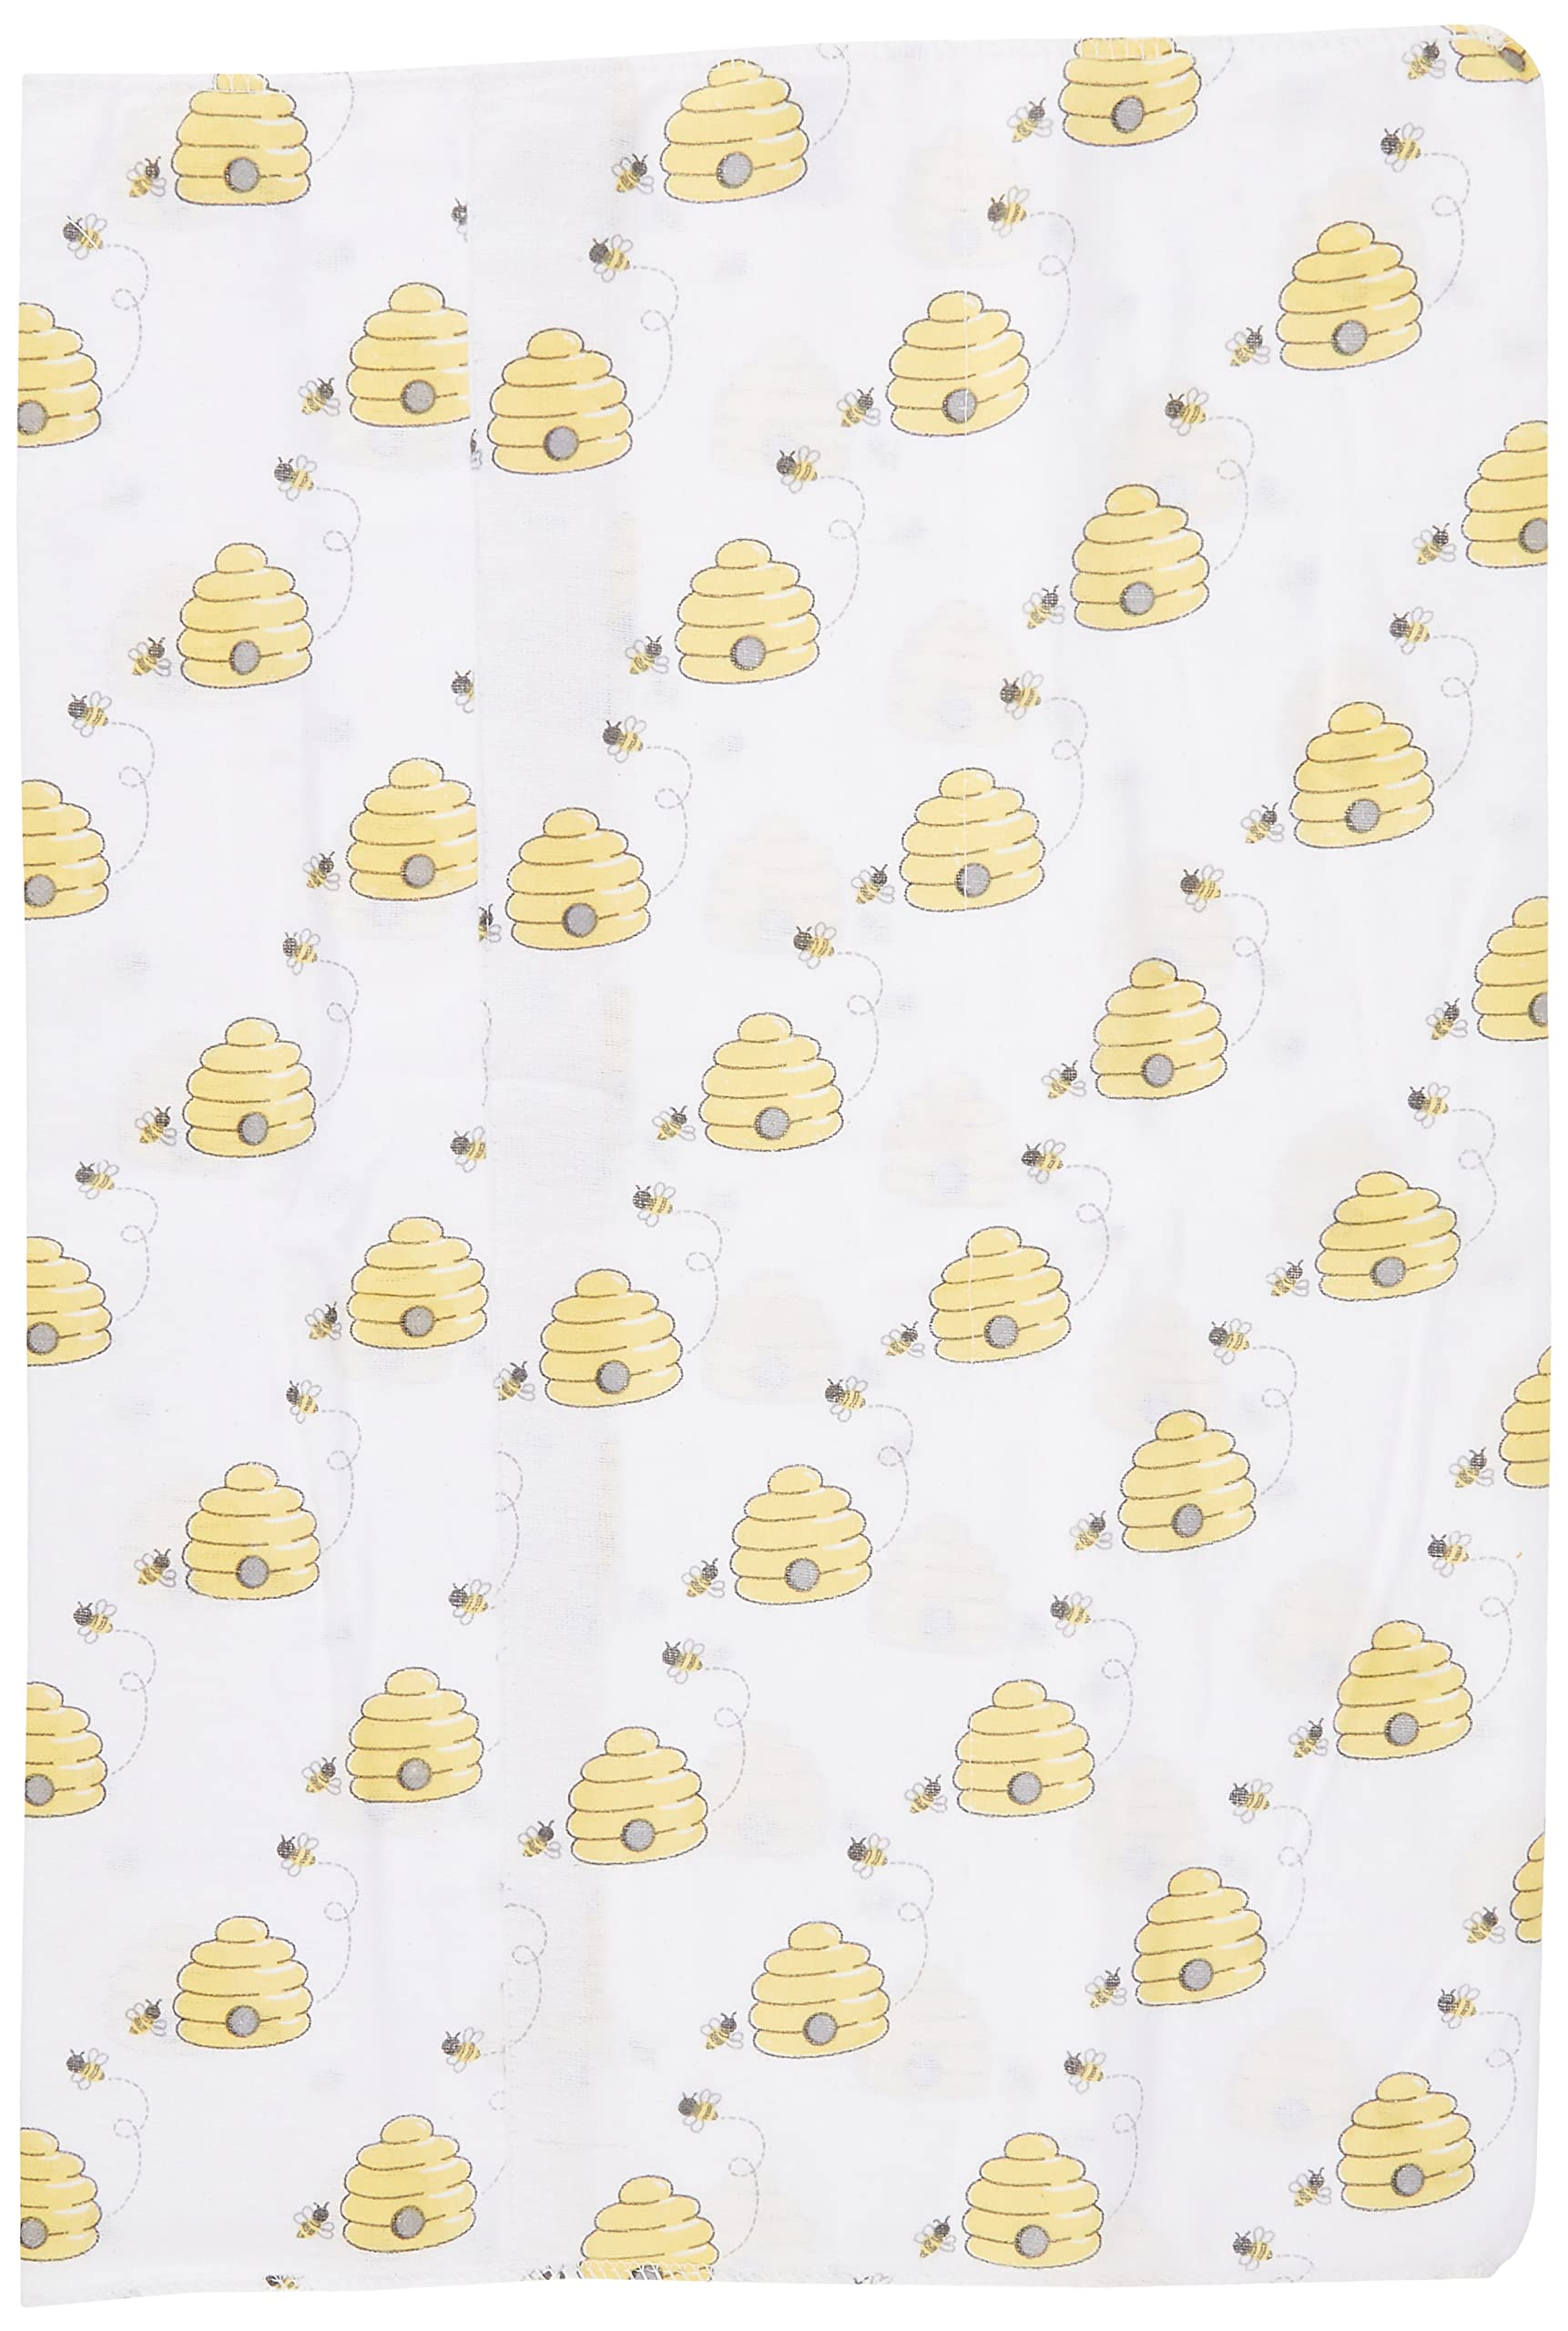 Hudson Baby Unisex Baby Cotton Flannel Burp Cloths, Bee, One Size